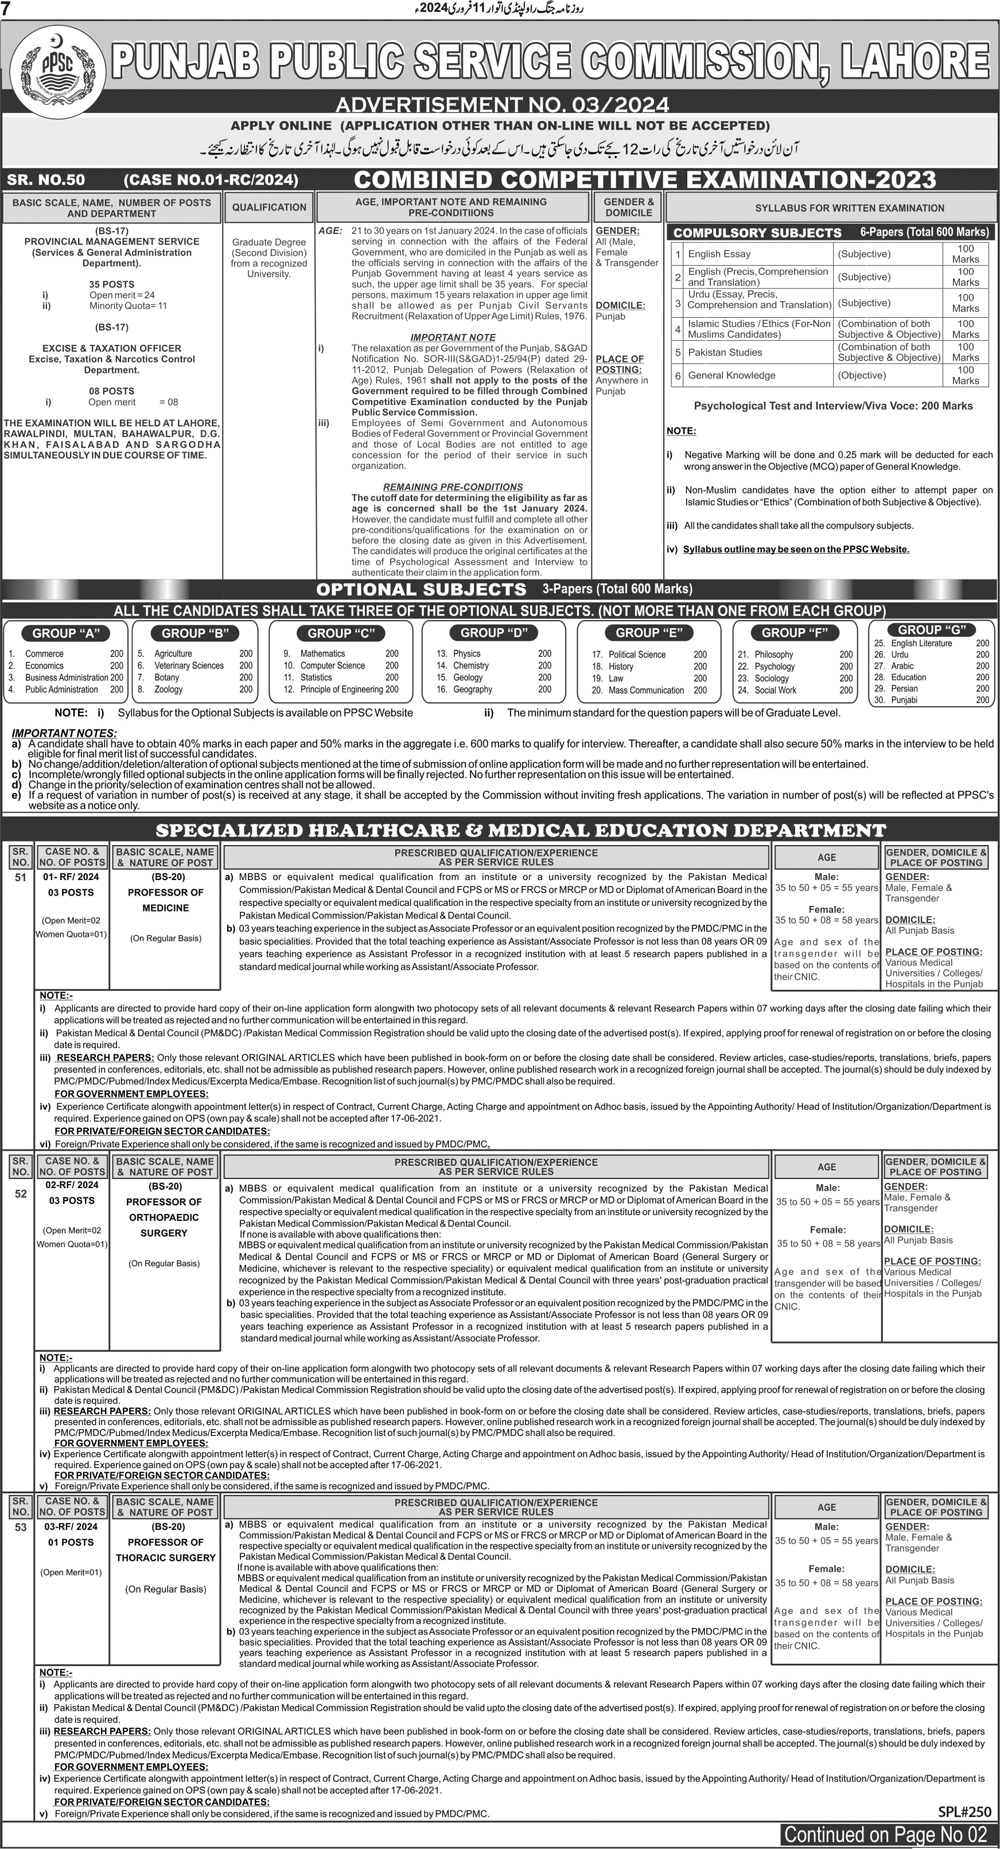 PPSC Health Department Vacancies & Combined Competitive Exams 2024